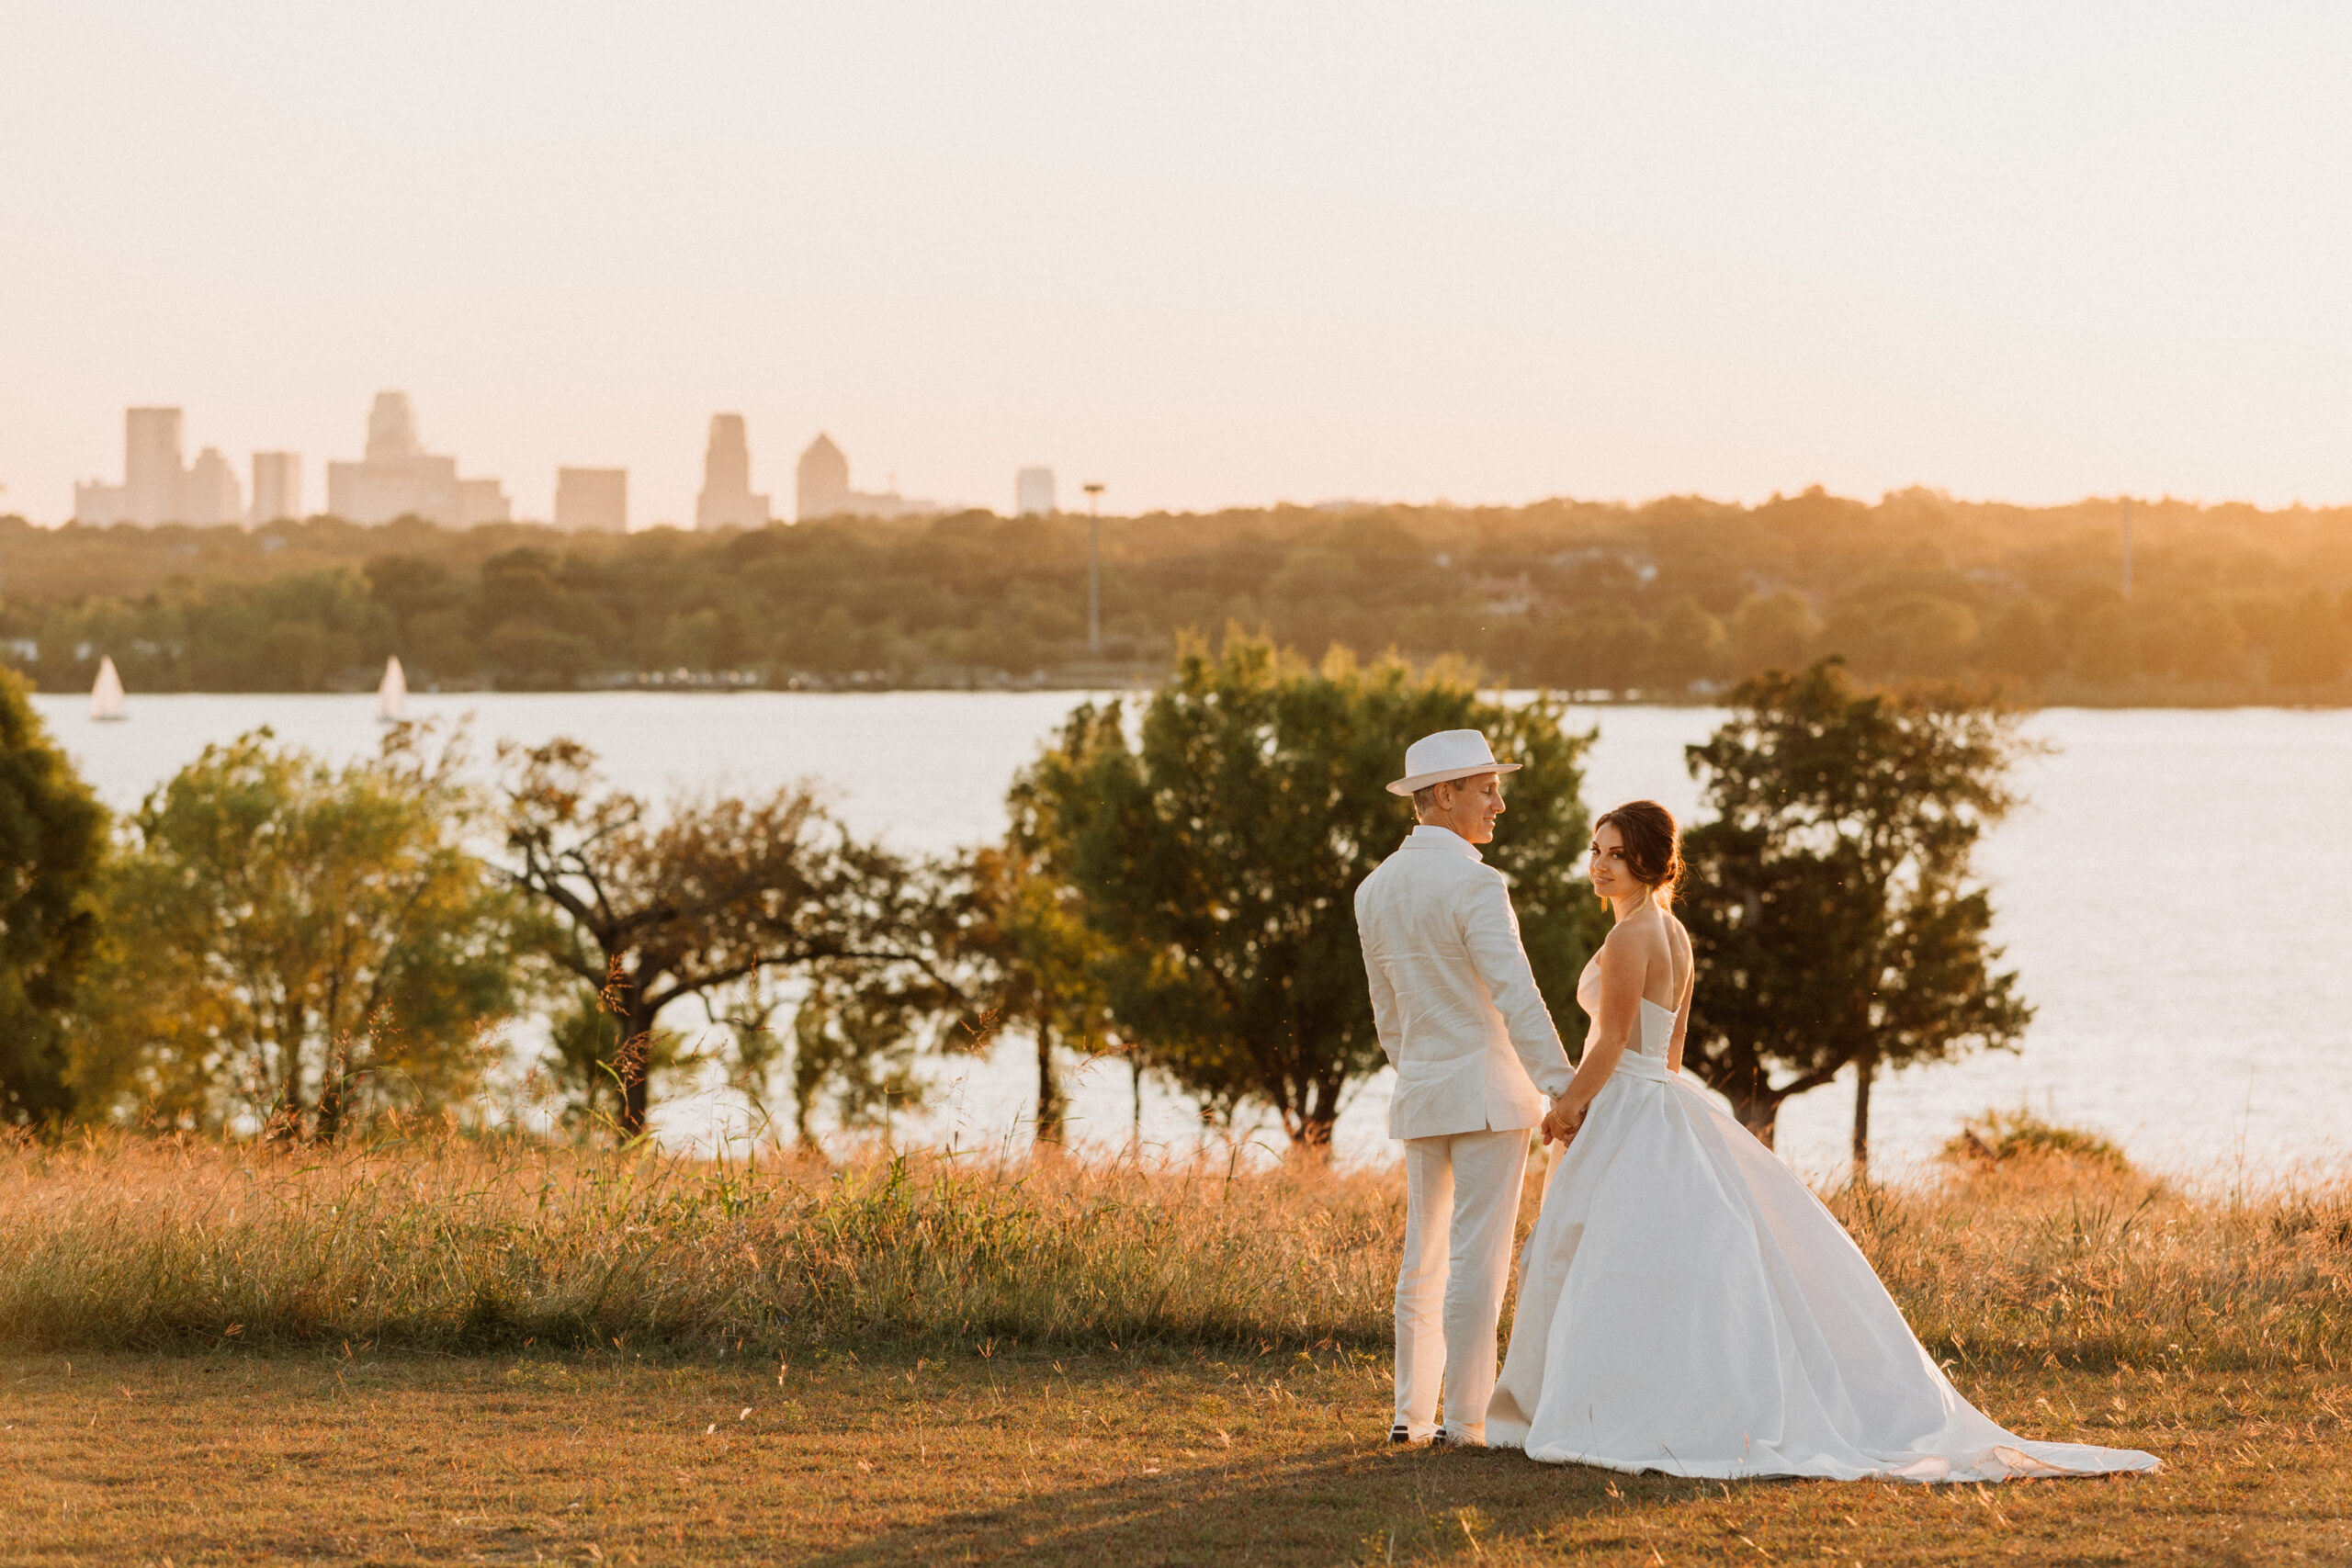 Bride in white dress stands holding hands with groom in white suit overlooking a scenic lake view with Dallas skyline in the background.
